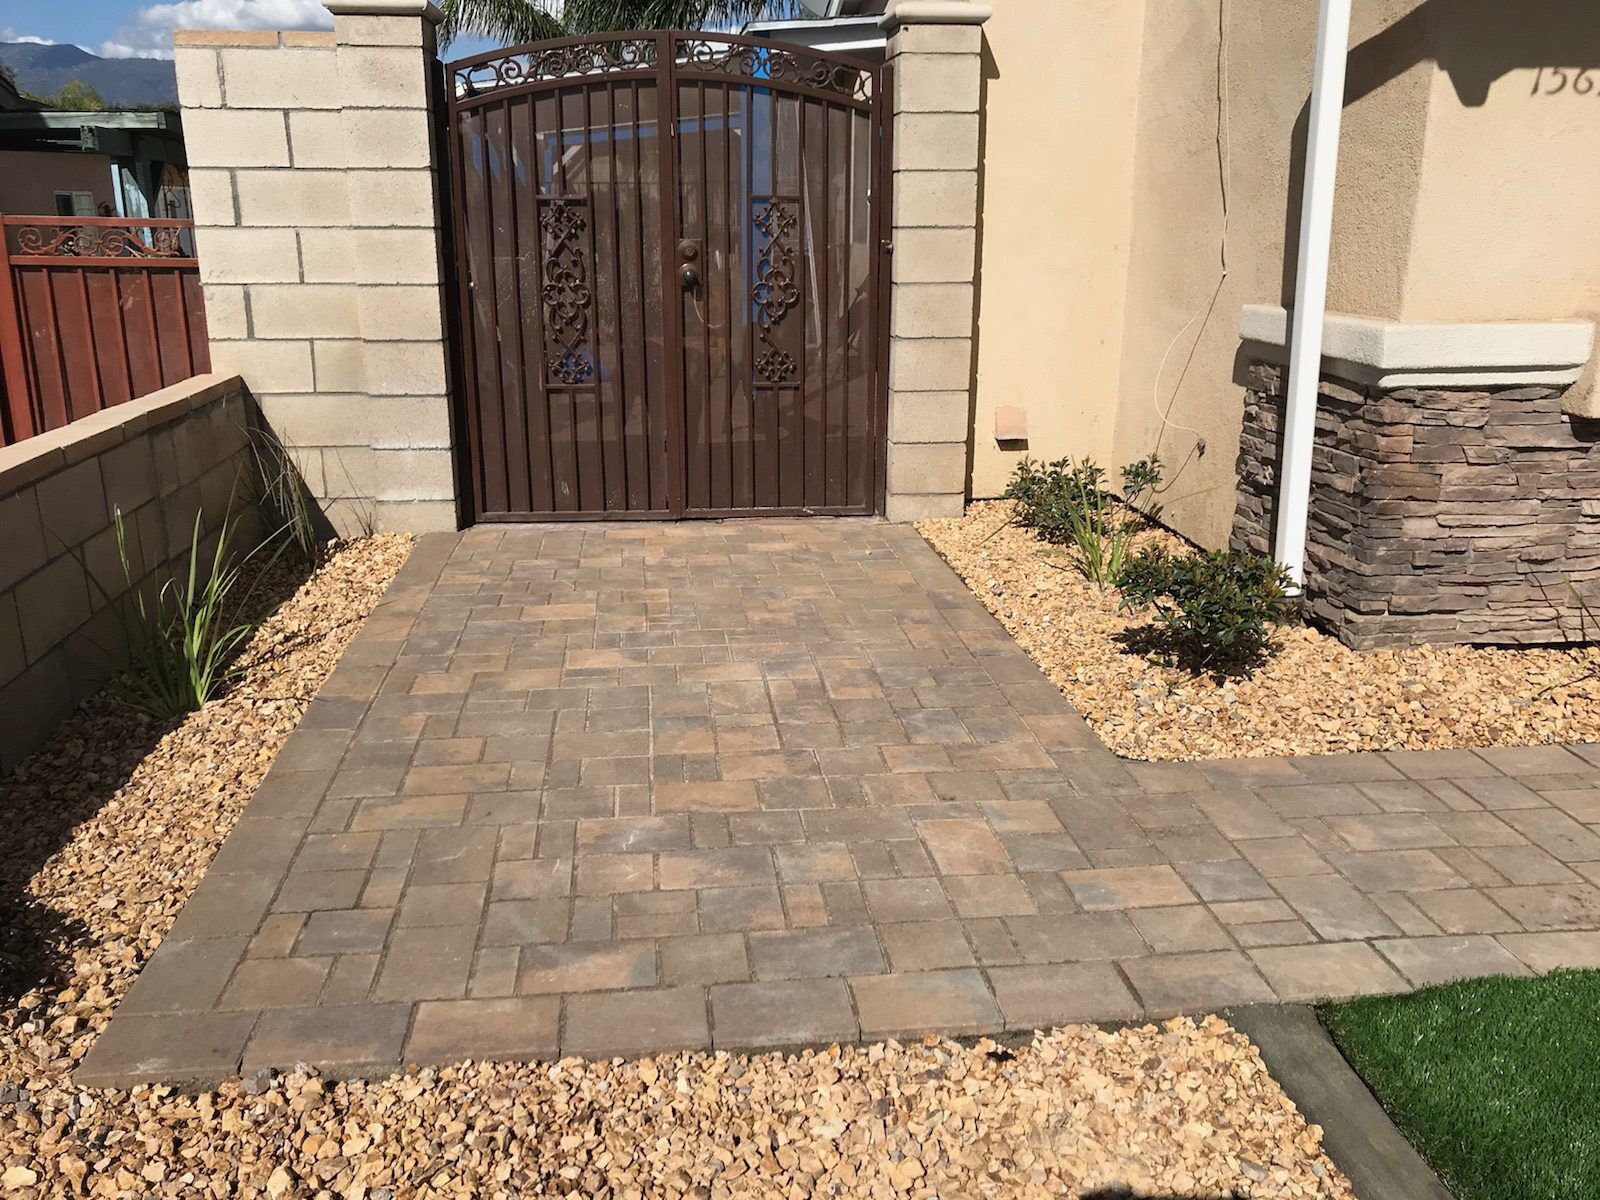 Outdoor Kitchens, BBQs, fire pits & Outddor Living areas - Green-R Pavers